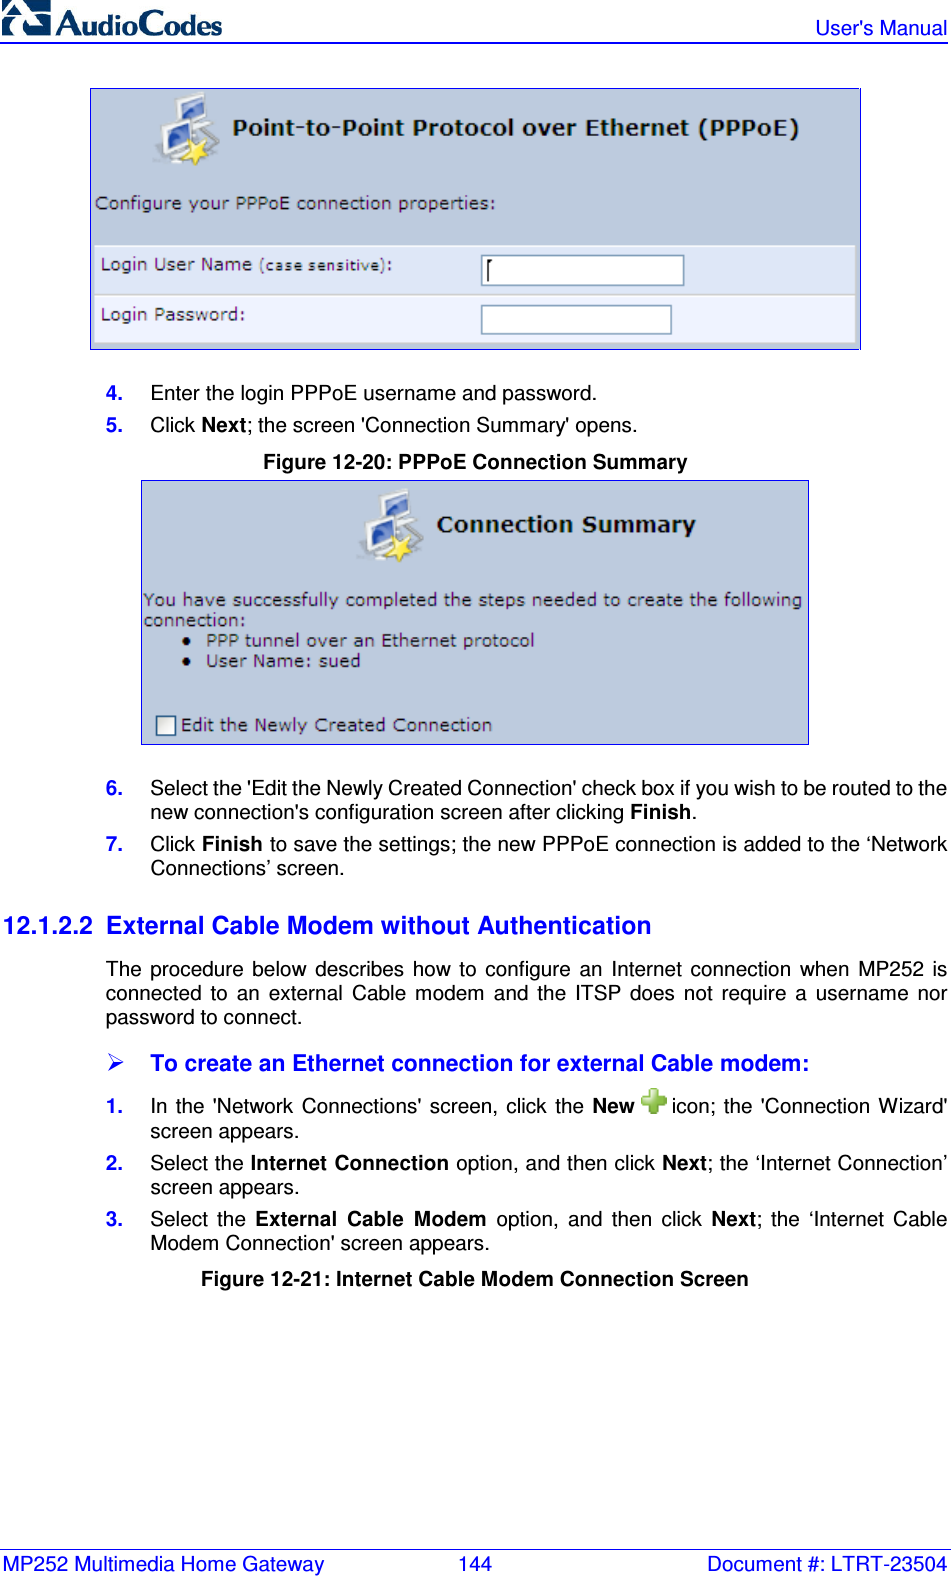 MP252 Multimedia Home Gateway  144  Document #: LTRT-23504   User&apos;s Manual   4.  Enter the login PPPoE username and password. 5.  Click Next; the screen &apos;Connection Summary&apos; opens. Figure 12-20: PPPoE Connection Summary  6.  Select the &apos;Edit the Newly Created Connection&apos; check box if you wish to be routed to the new connection&apos;s configuration screen after clicking Finish. 7.  Click Finish to save the settings; the new PPPoE connection is added to the ‘Network Connections’ screen. 12.1.2.2  External Cable Modem without Authentication The  procedure  below  describes  how  to  configure  an  Internet  connection  when  MP252  is connected  to  an  external  Cable  modem  and  the  ITSP  does  not  require  a  username  nor password to connect.  To create an Ethernet connection for external Cable modem: 1.  In the &apos;Network Connections&apos;  screen,  click the New   icon;  the  &apos;Connection Wizard&apos; screen appears. 2.  Select the Internet Connection option, and then click Next; the ‘Internet Connection’ screen appears. 3.  Select  the  External  Cable  Modem  option,  and  then  click  Next;  the  ‘Internet  Cable Modem Connection&apos; screen appears. Figure 12-21: Internet Cable Modem Connection Screen 